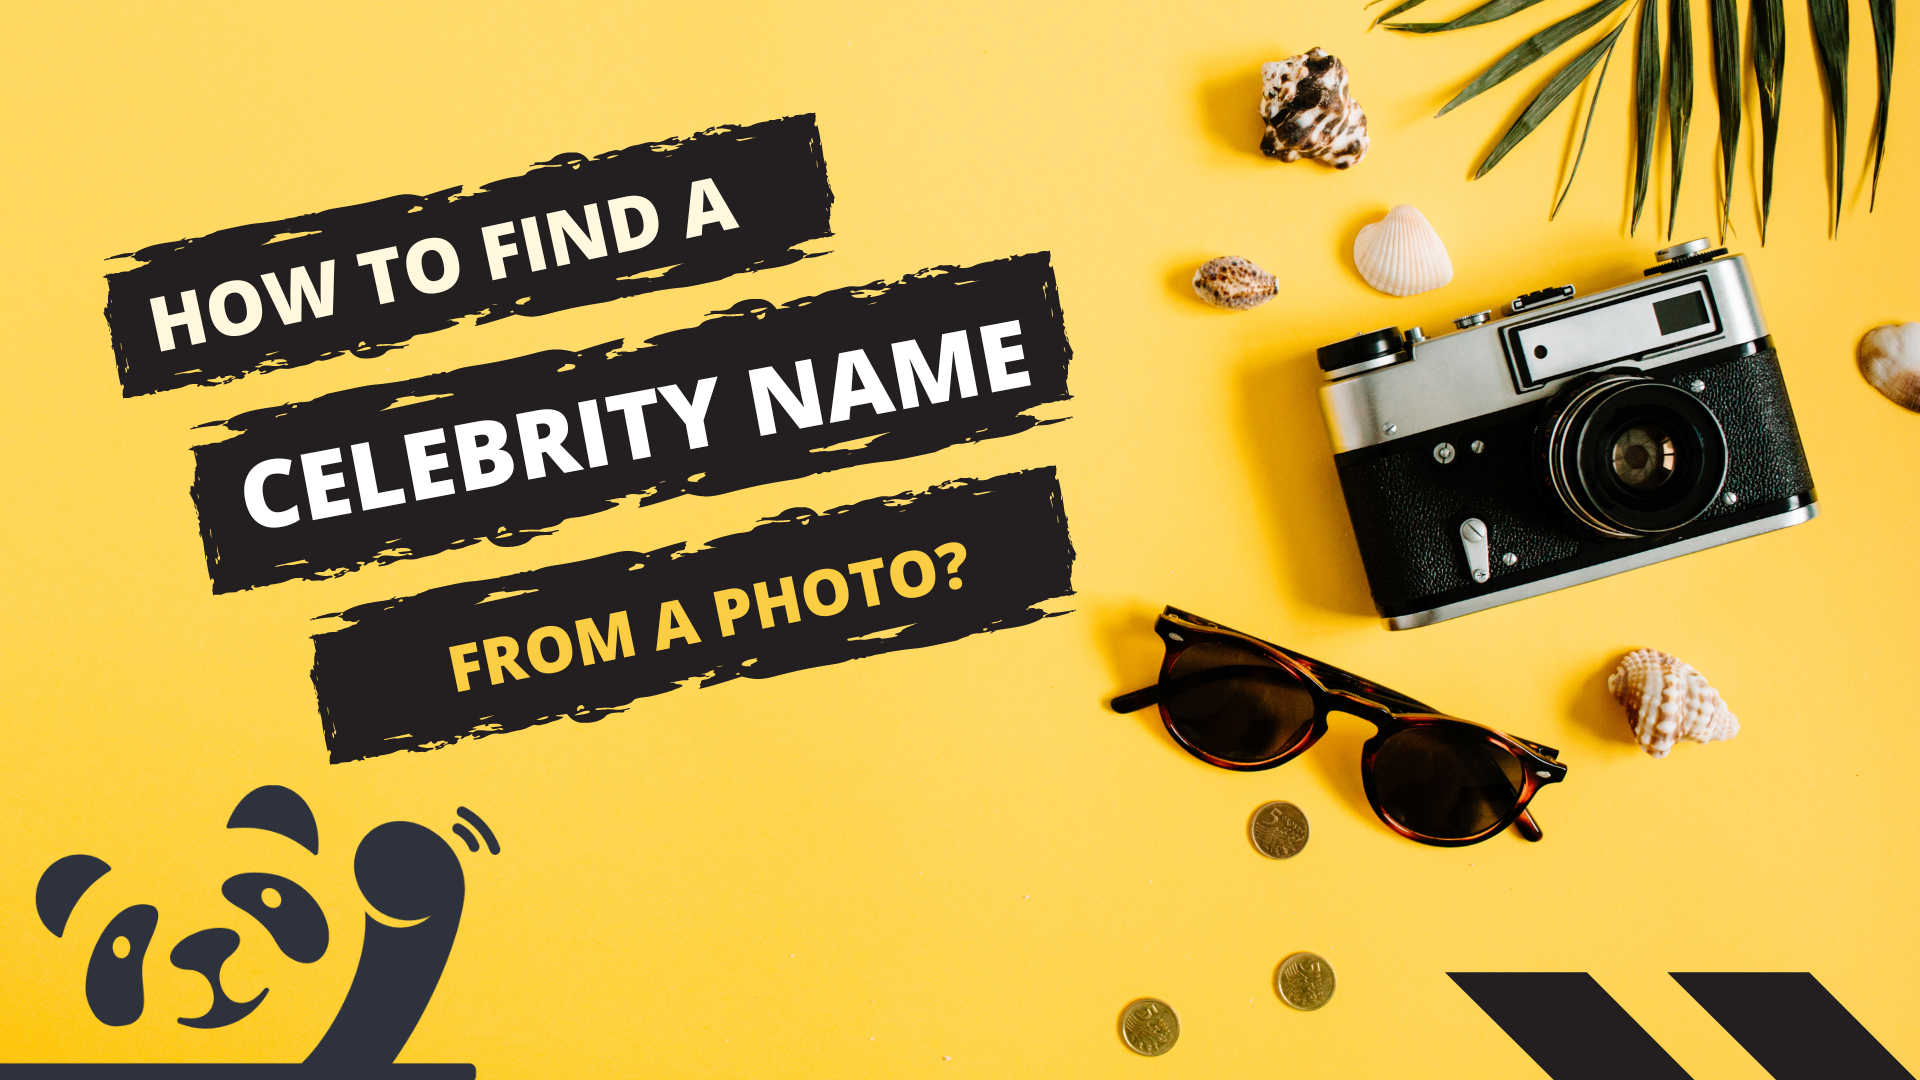 How to Find a Celebrity Name from a Photo